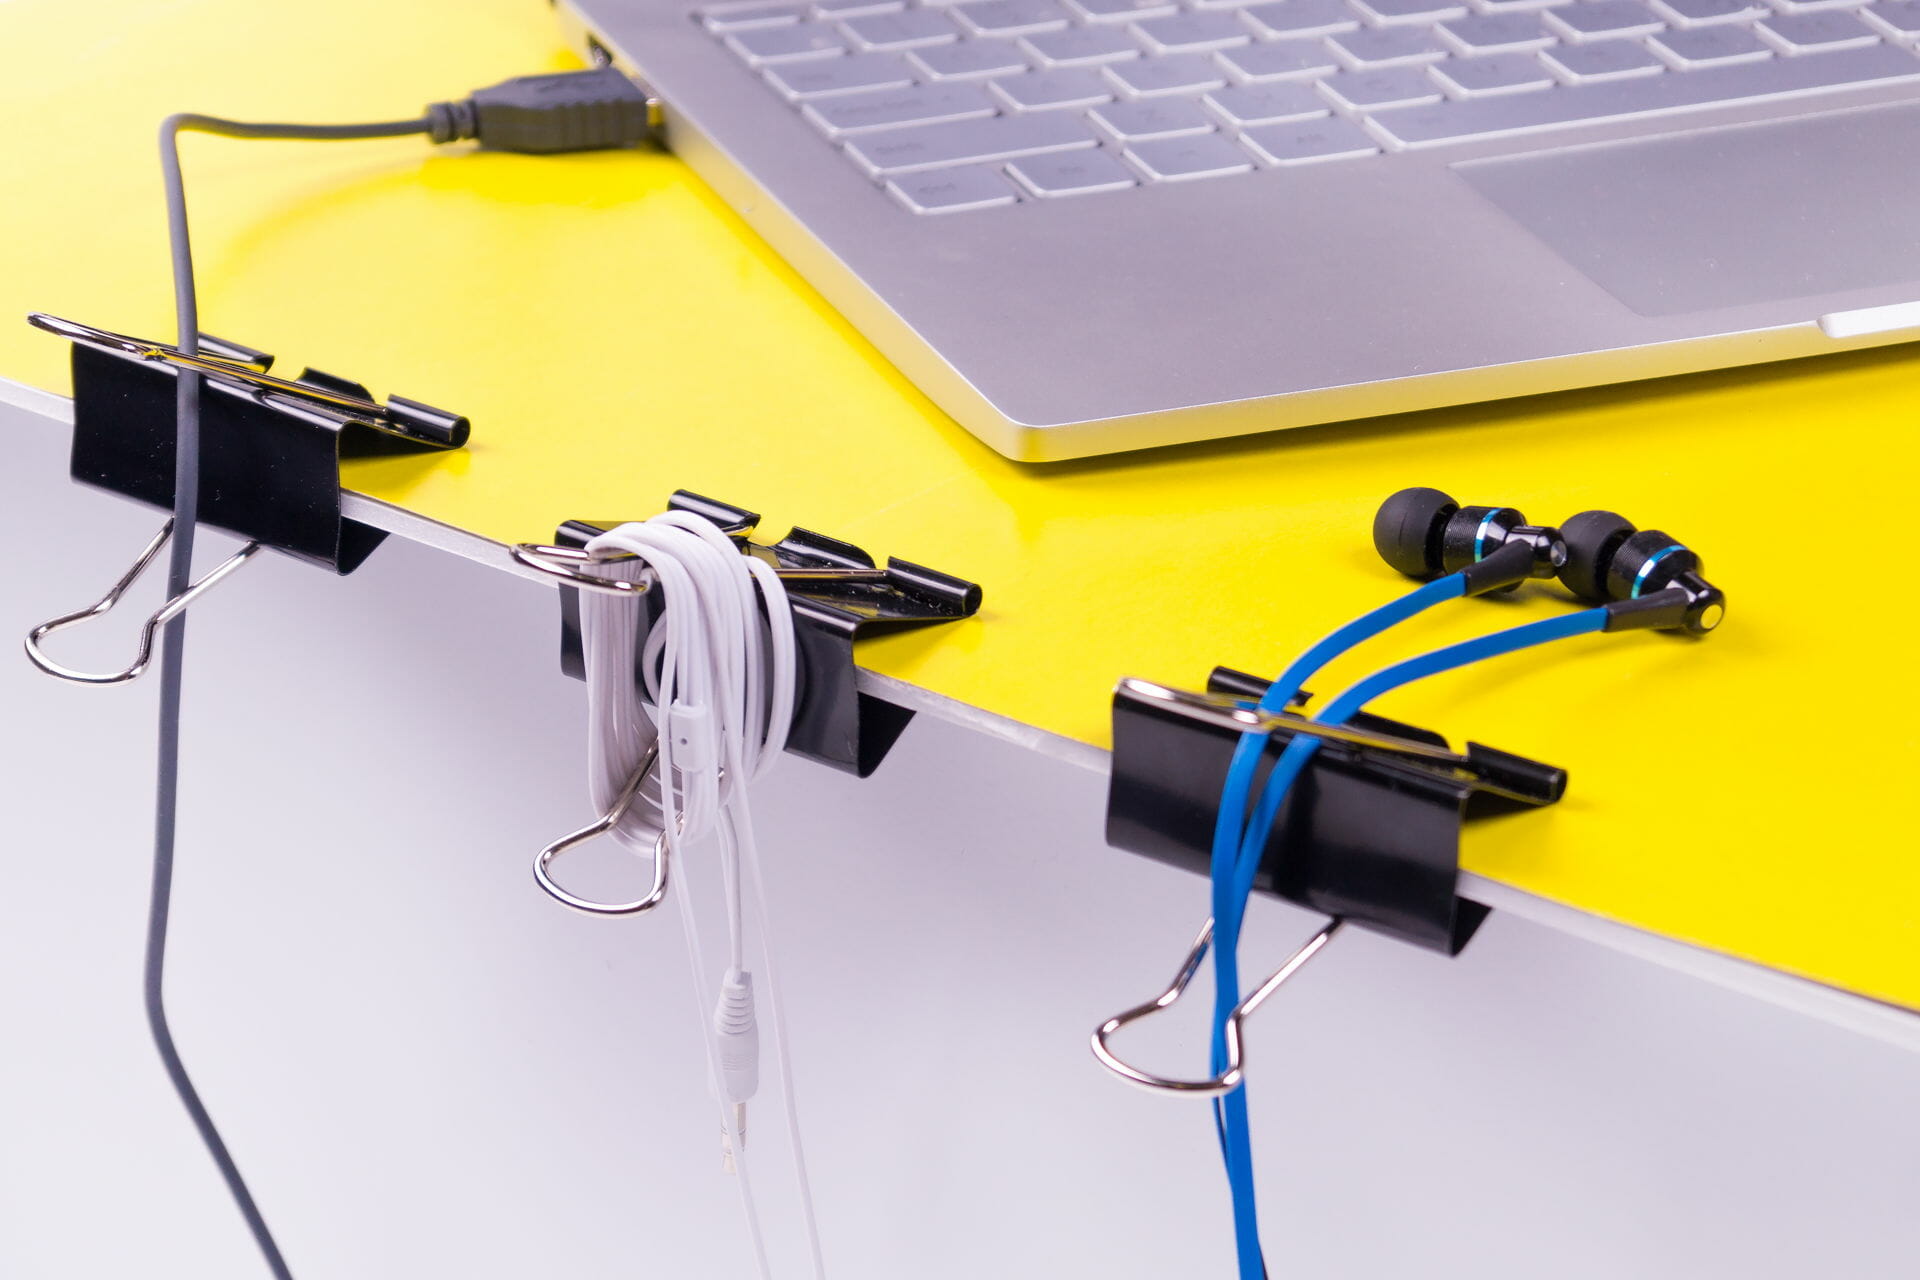 5 best cable accessories to organize your